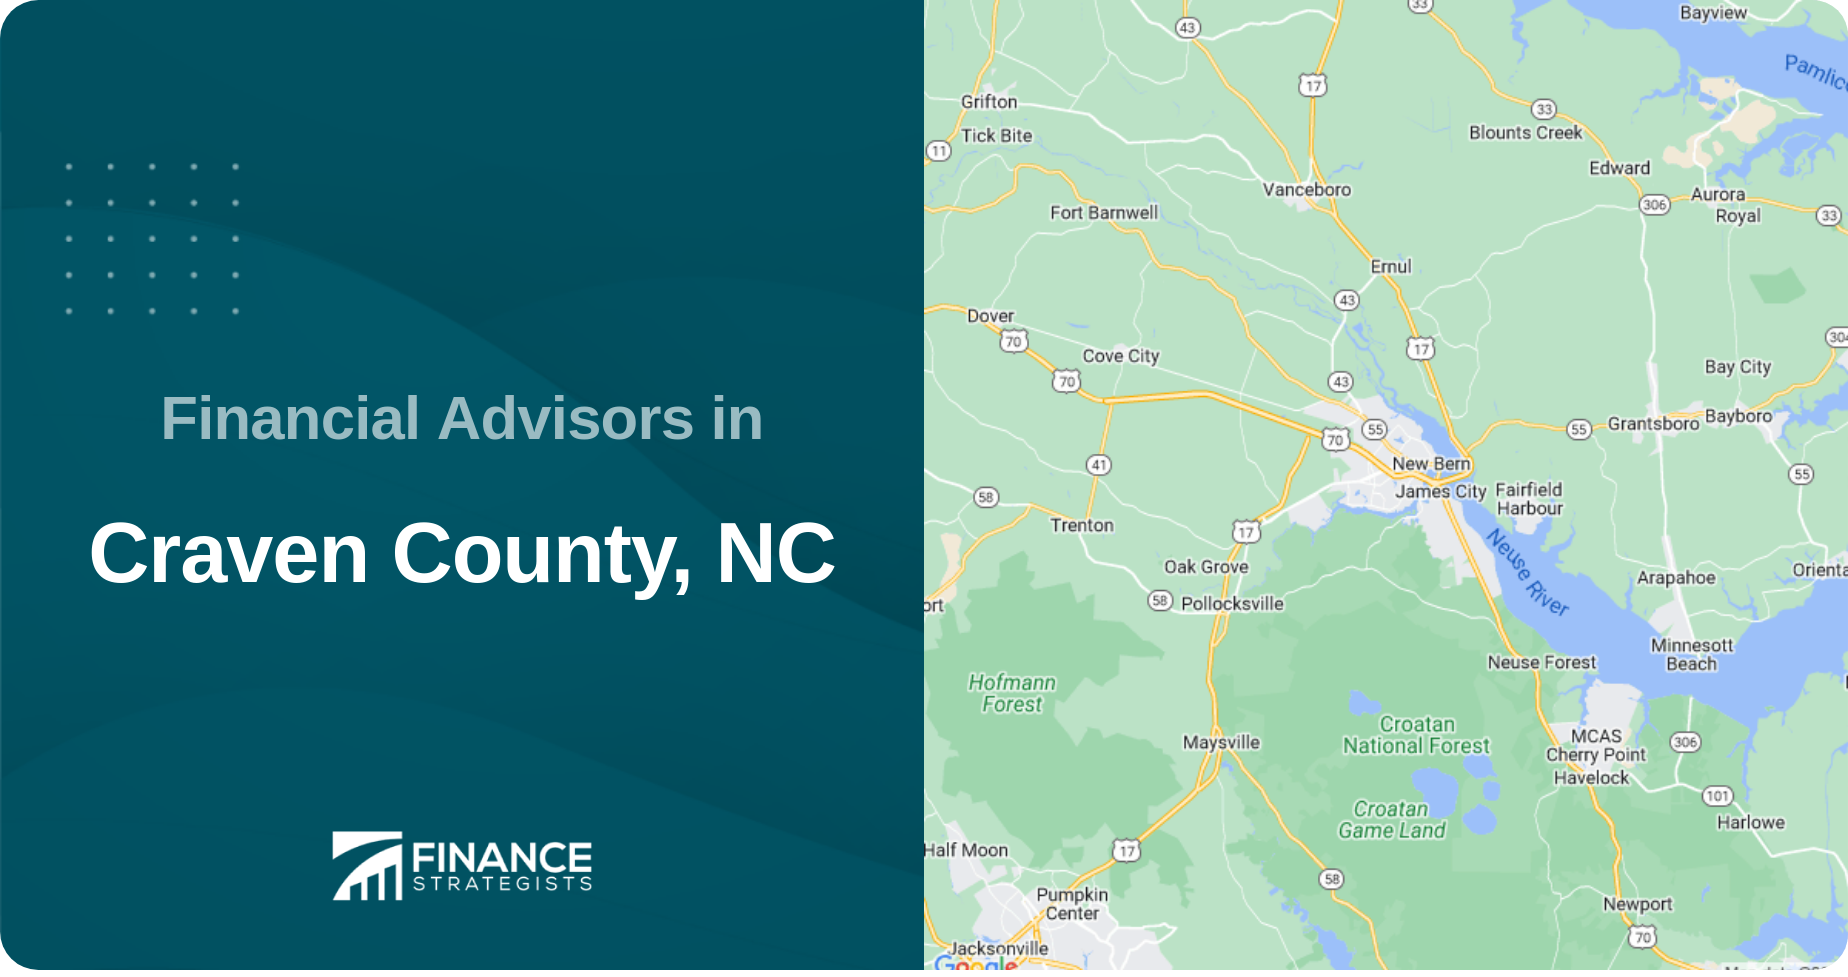 Financial Advisors in Craven County, NC